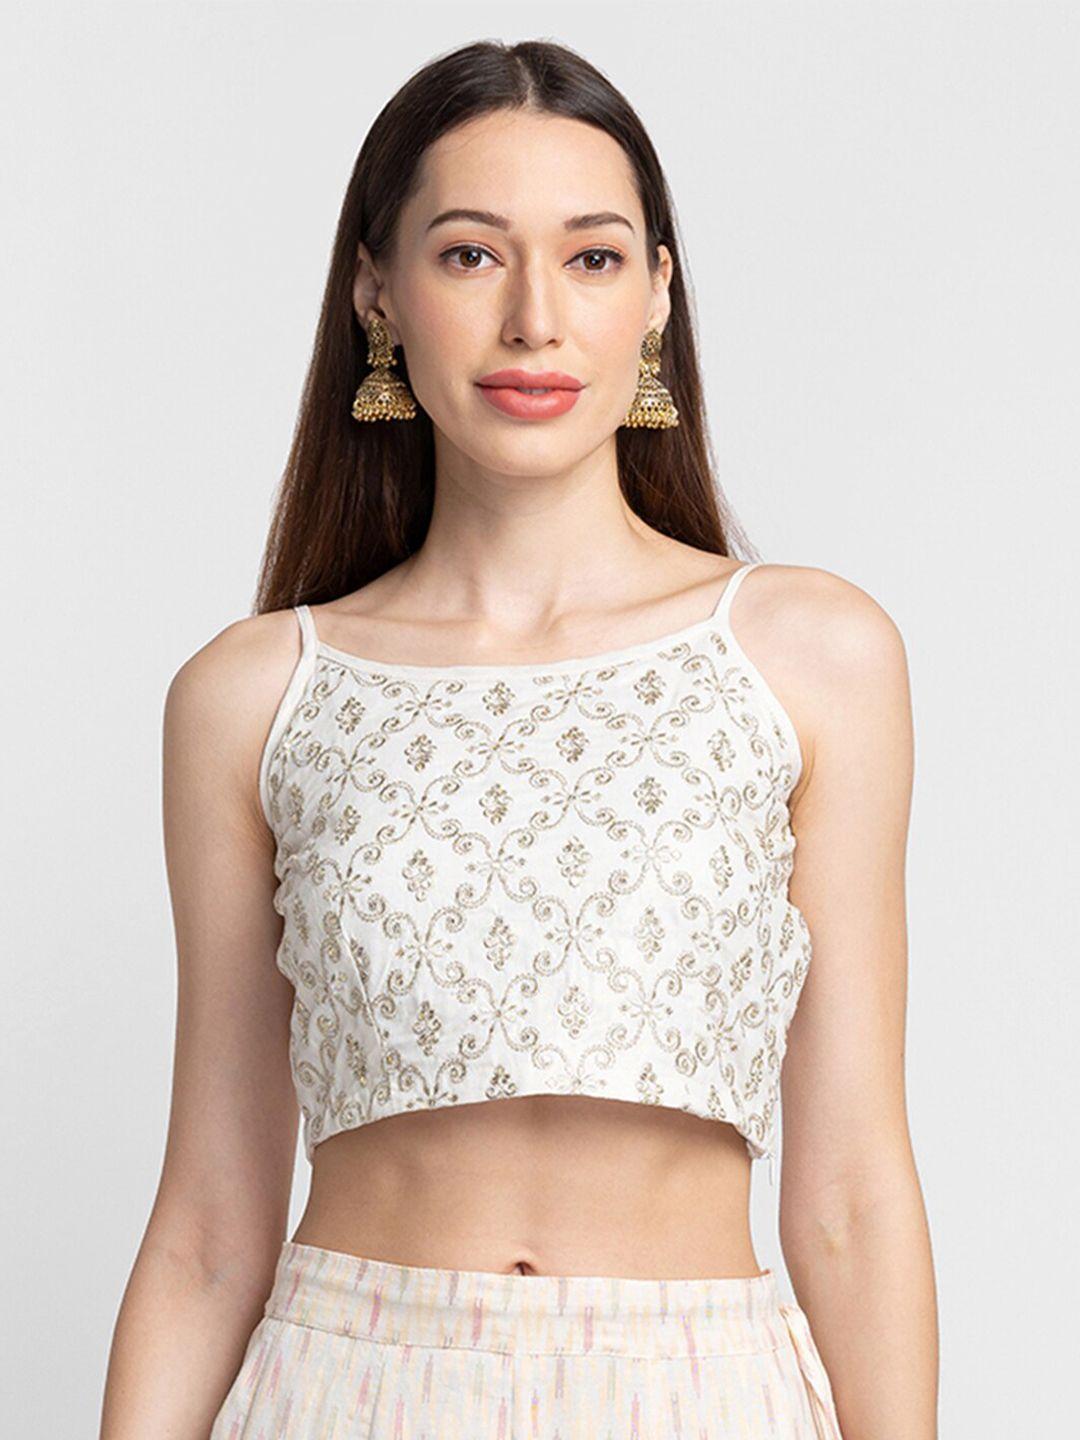 globus woman embroidered crop top